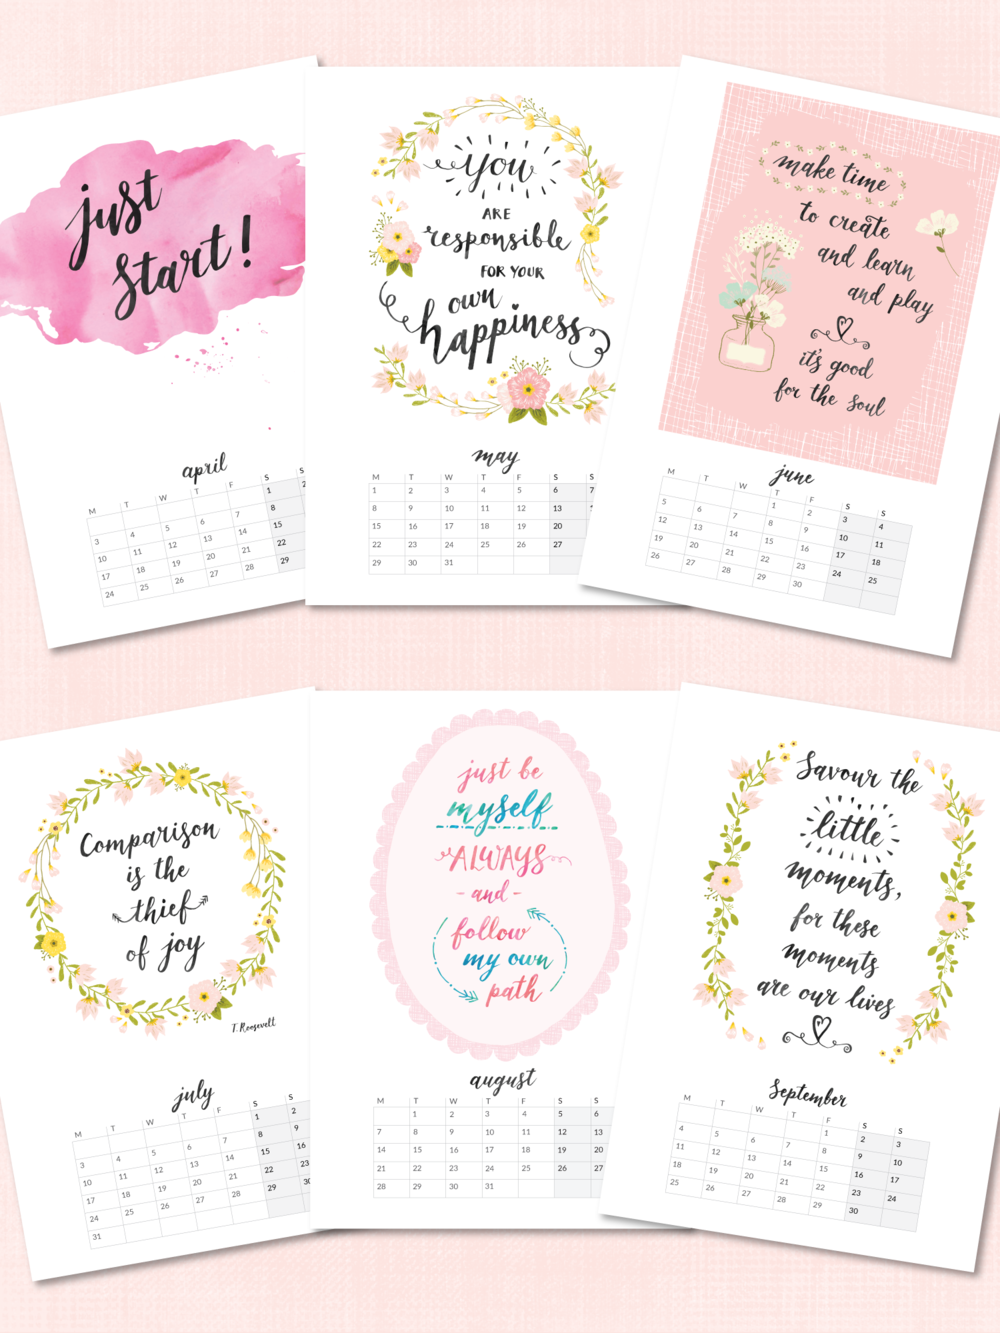 Inspirational Quotes For Calendars